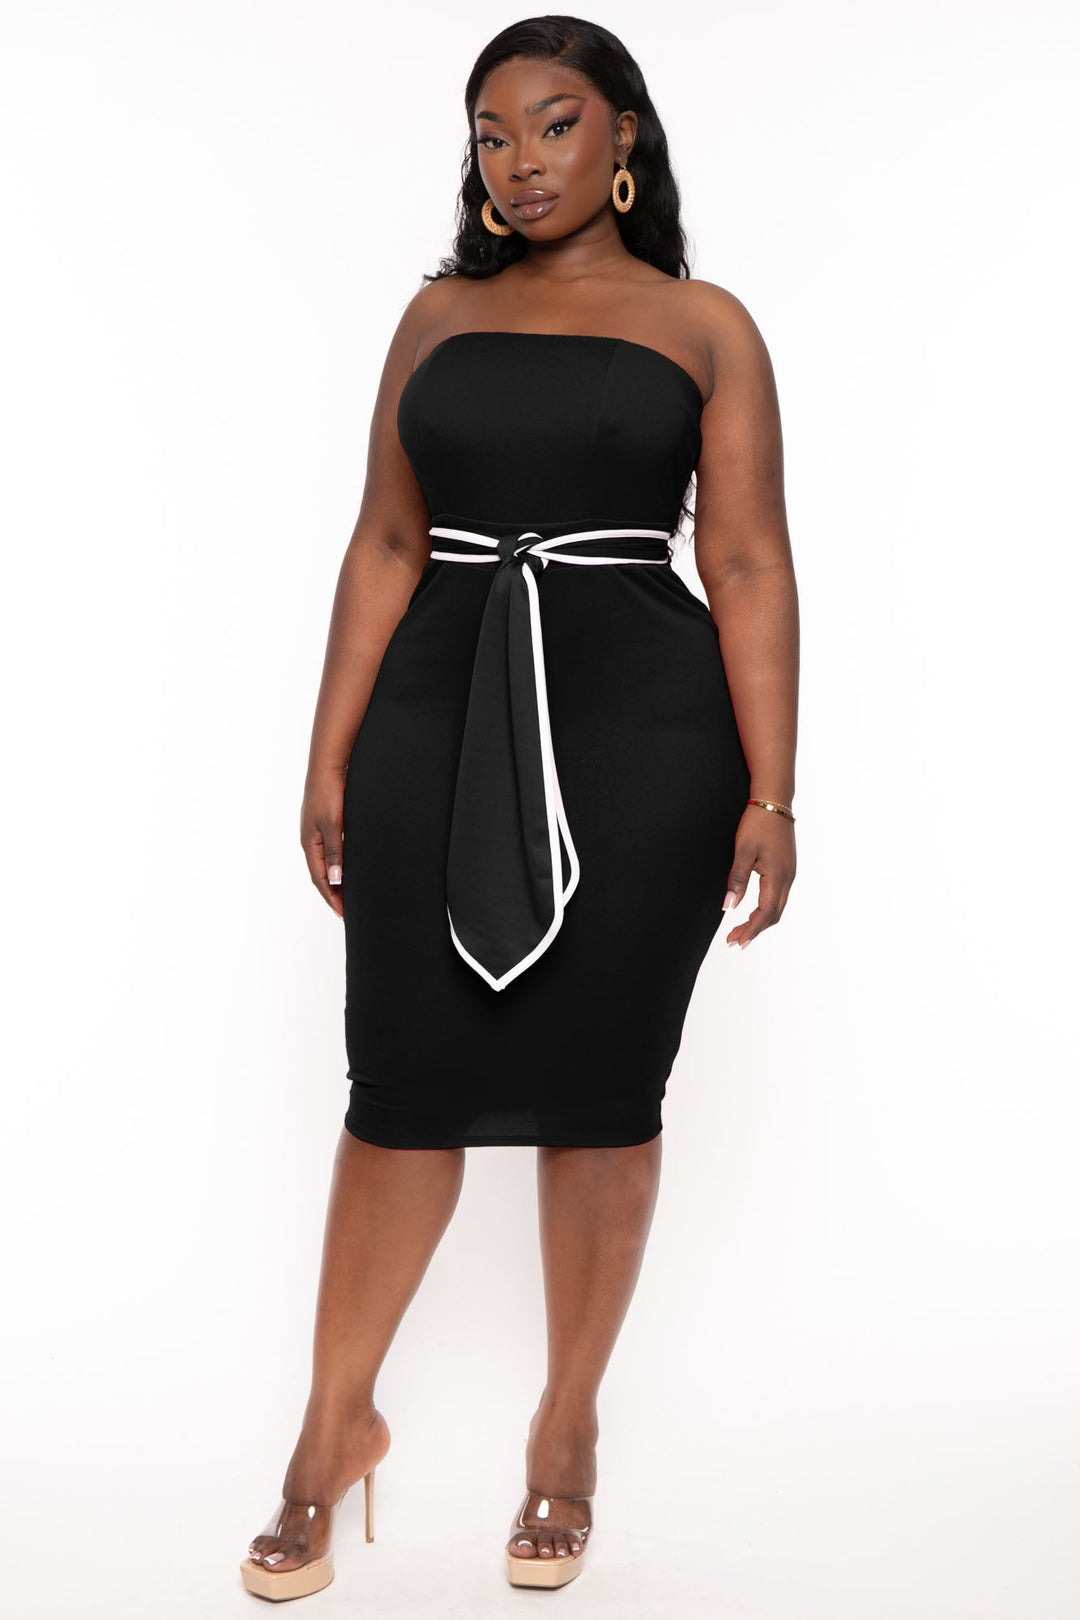 Best Plus Size Little Black Dresses For Any Occasion - The Plus Life